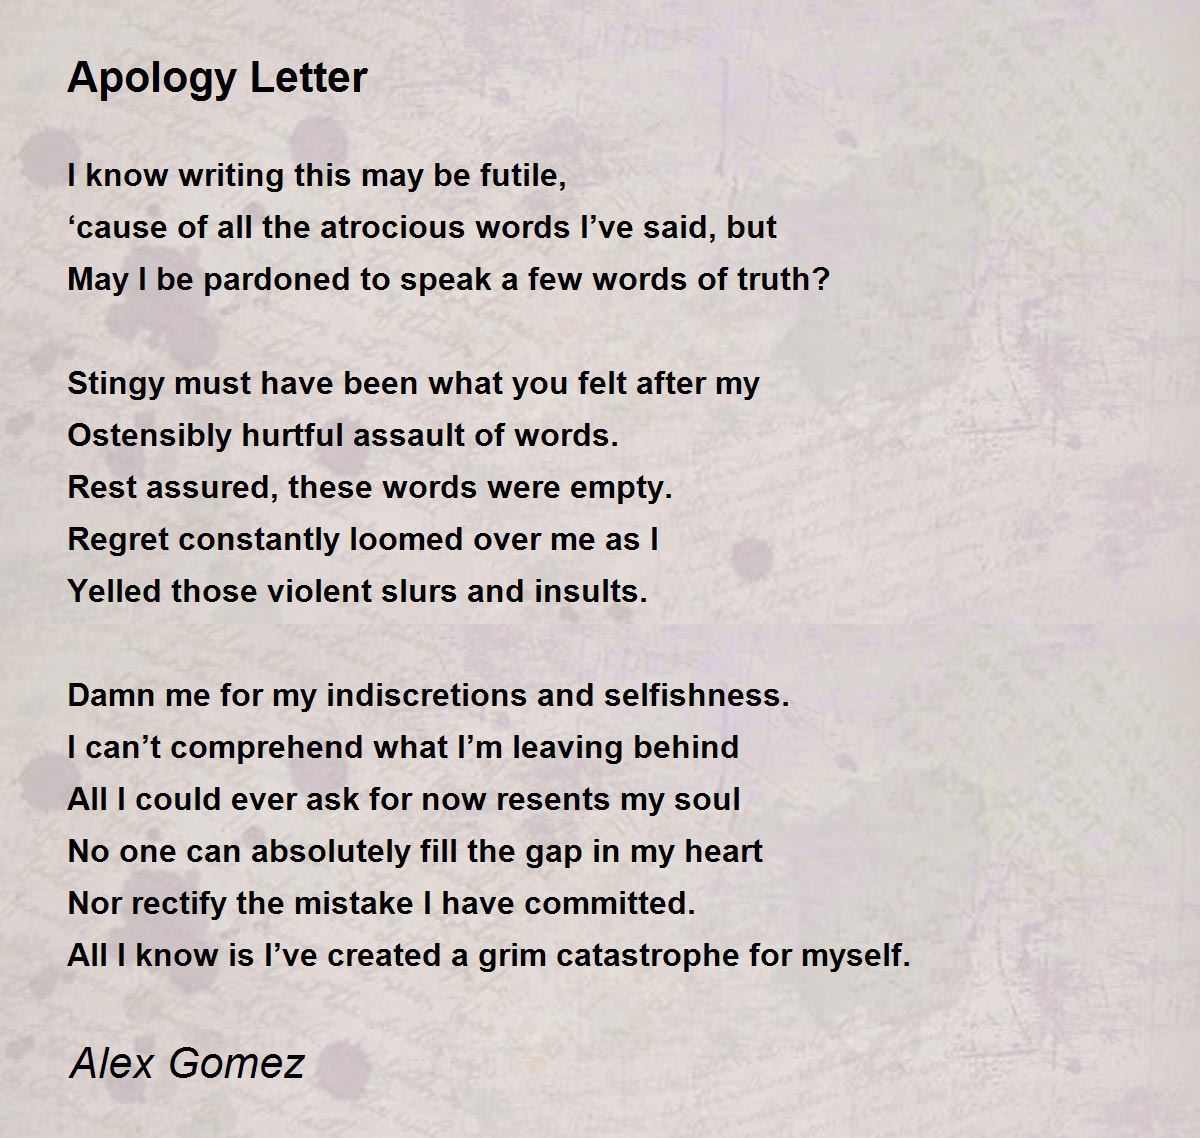 Apology Letter - Apology Letter Poem by Alex Gomez.